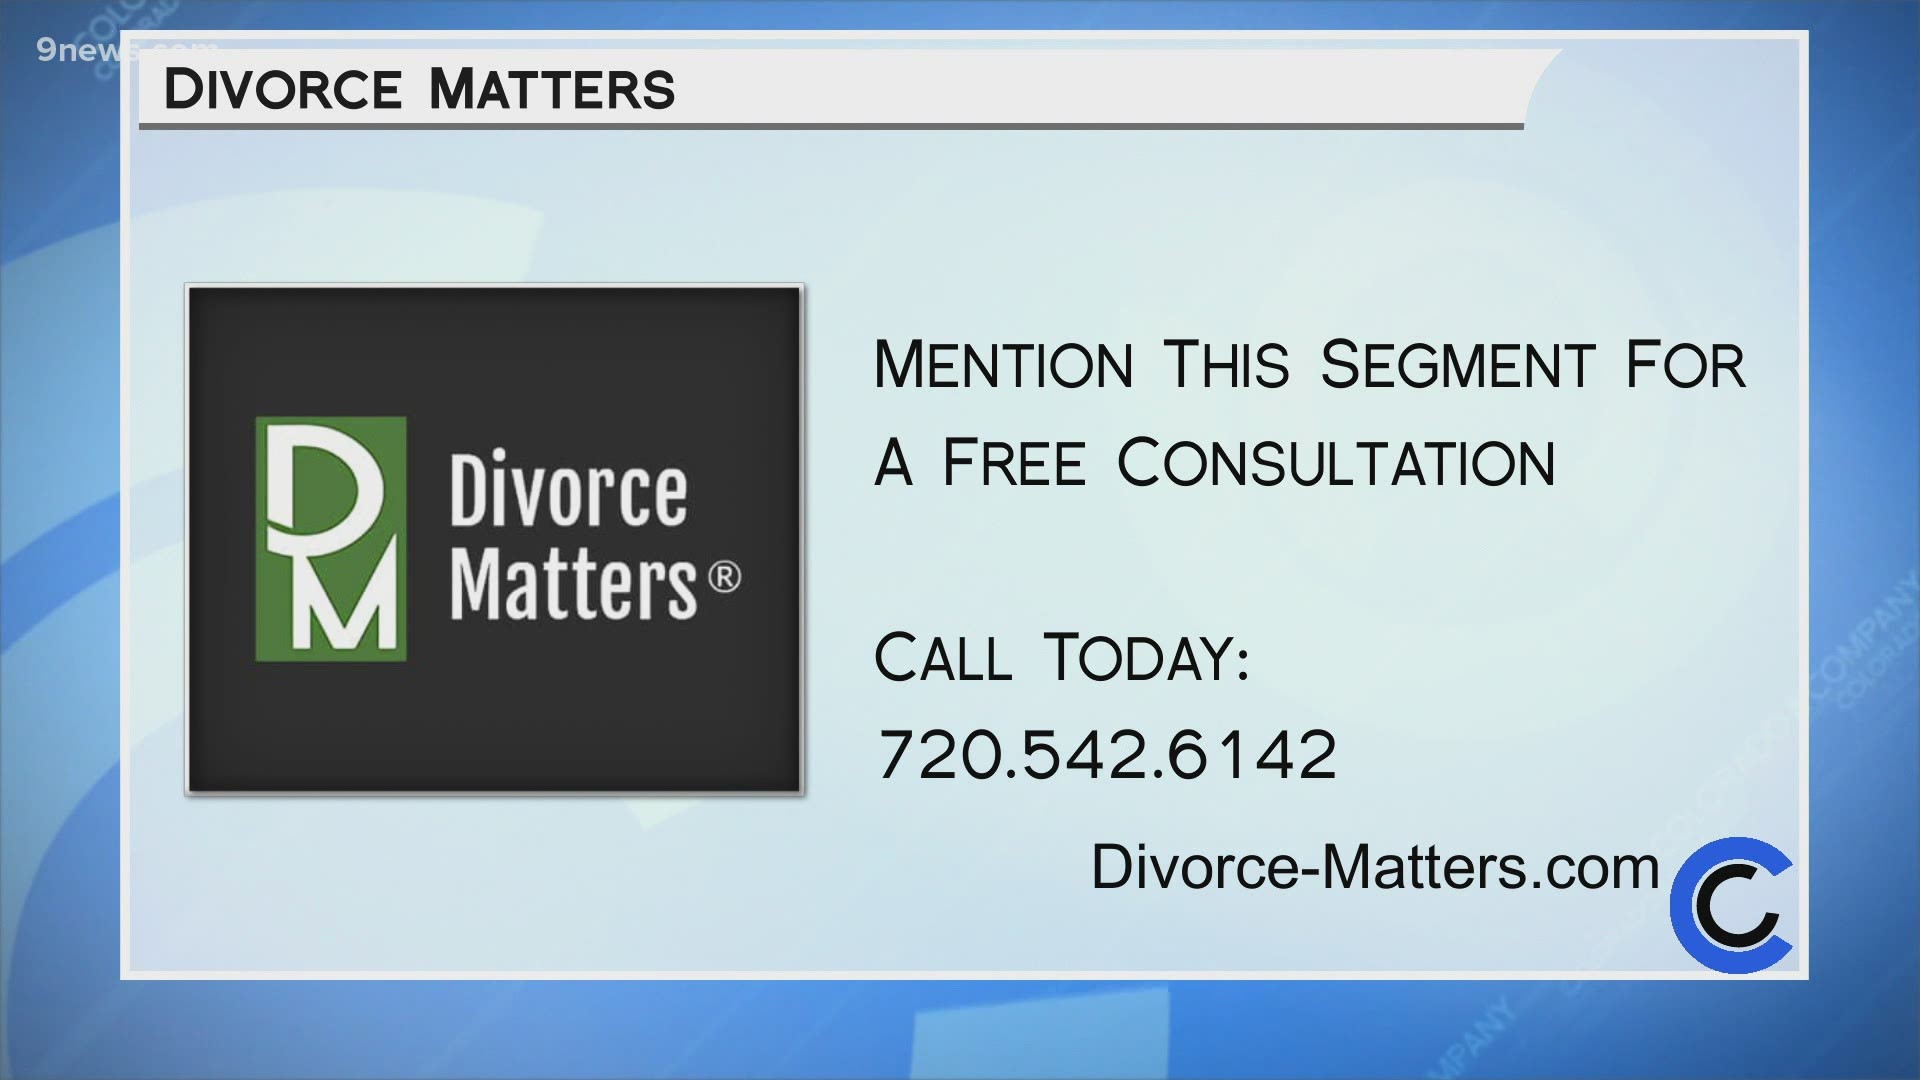 Call 720.542.6142 or visit Divorce-Matters.com to learn more about navigating a sensitive time in your life. Mention this segment for a free consultation.